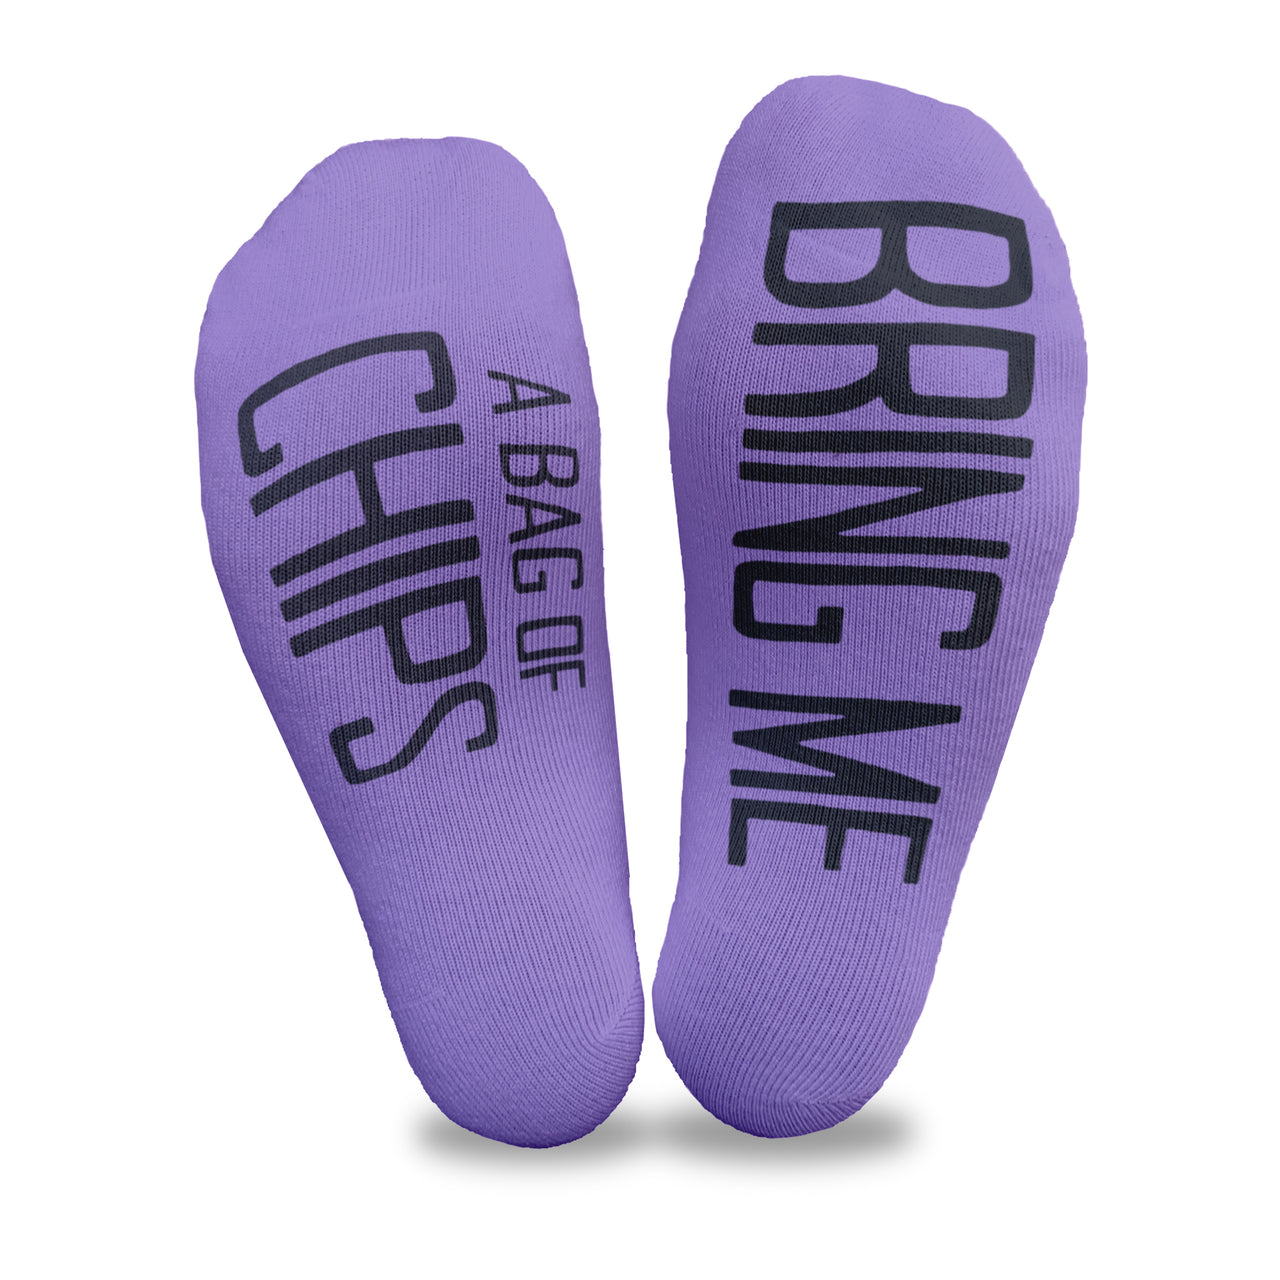 Bring me a bag of chips custom printed on the bottom soles of purple no show socks make a fun gift idea for your chip loving bestie.